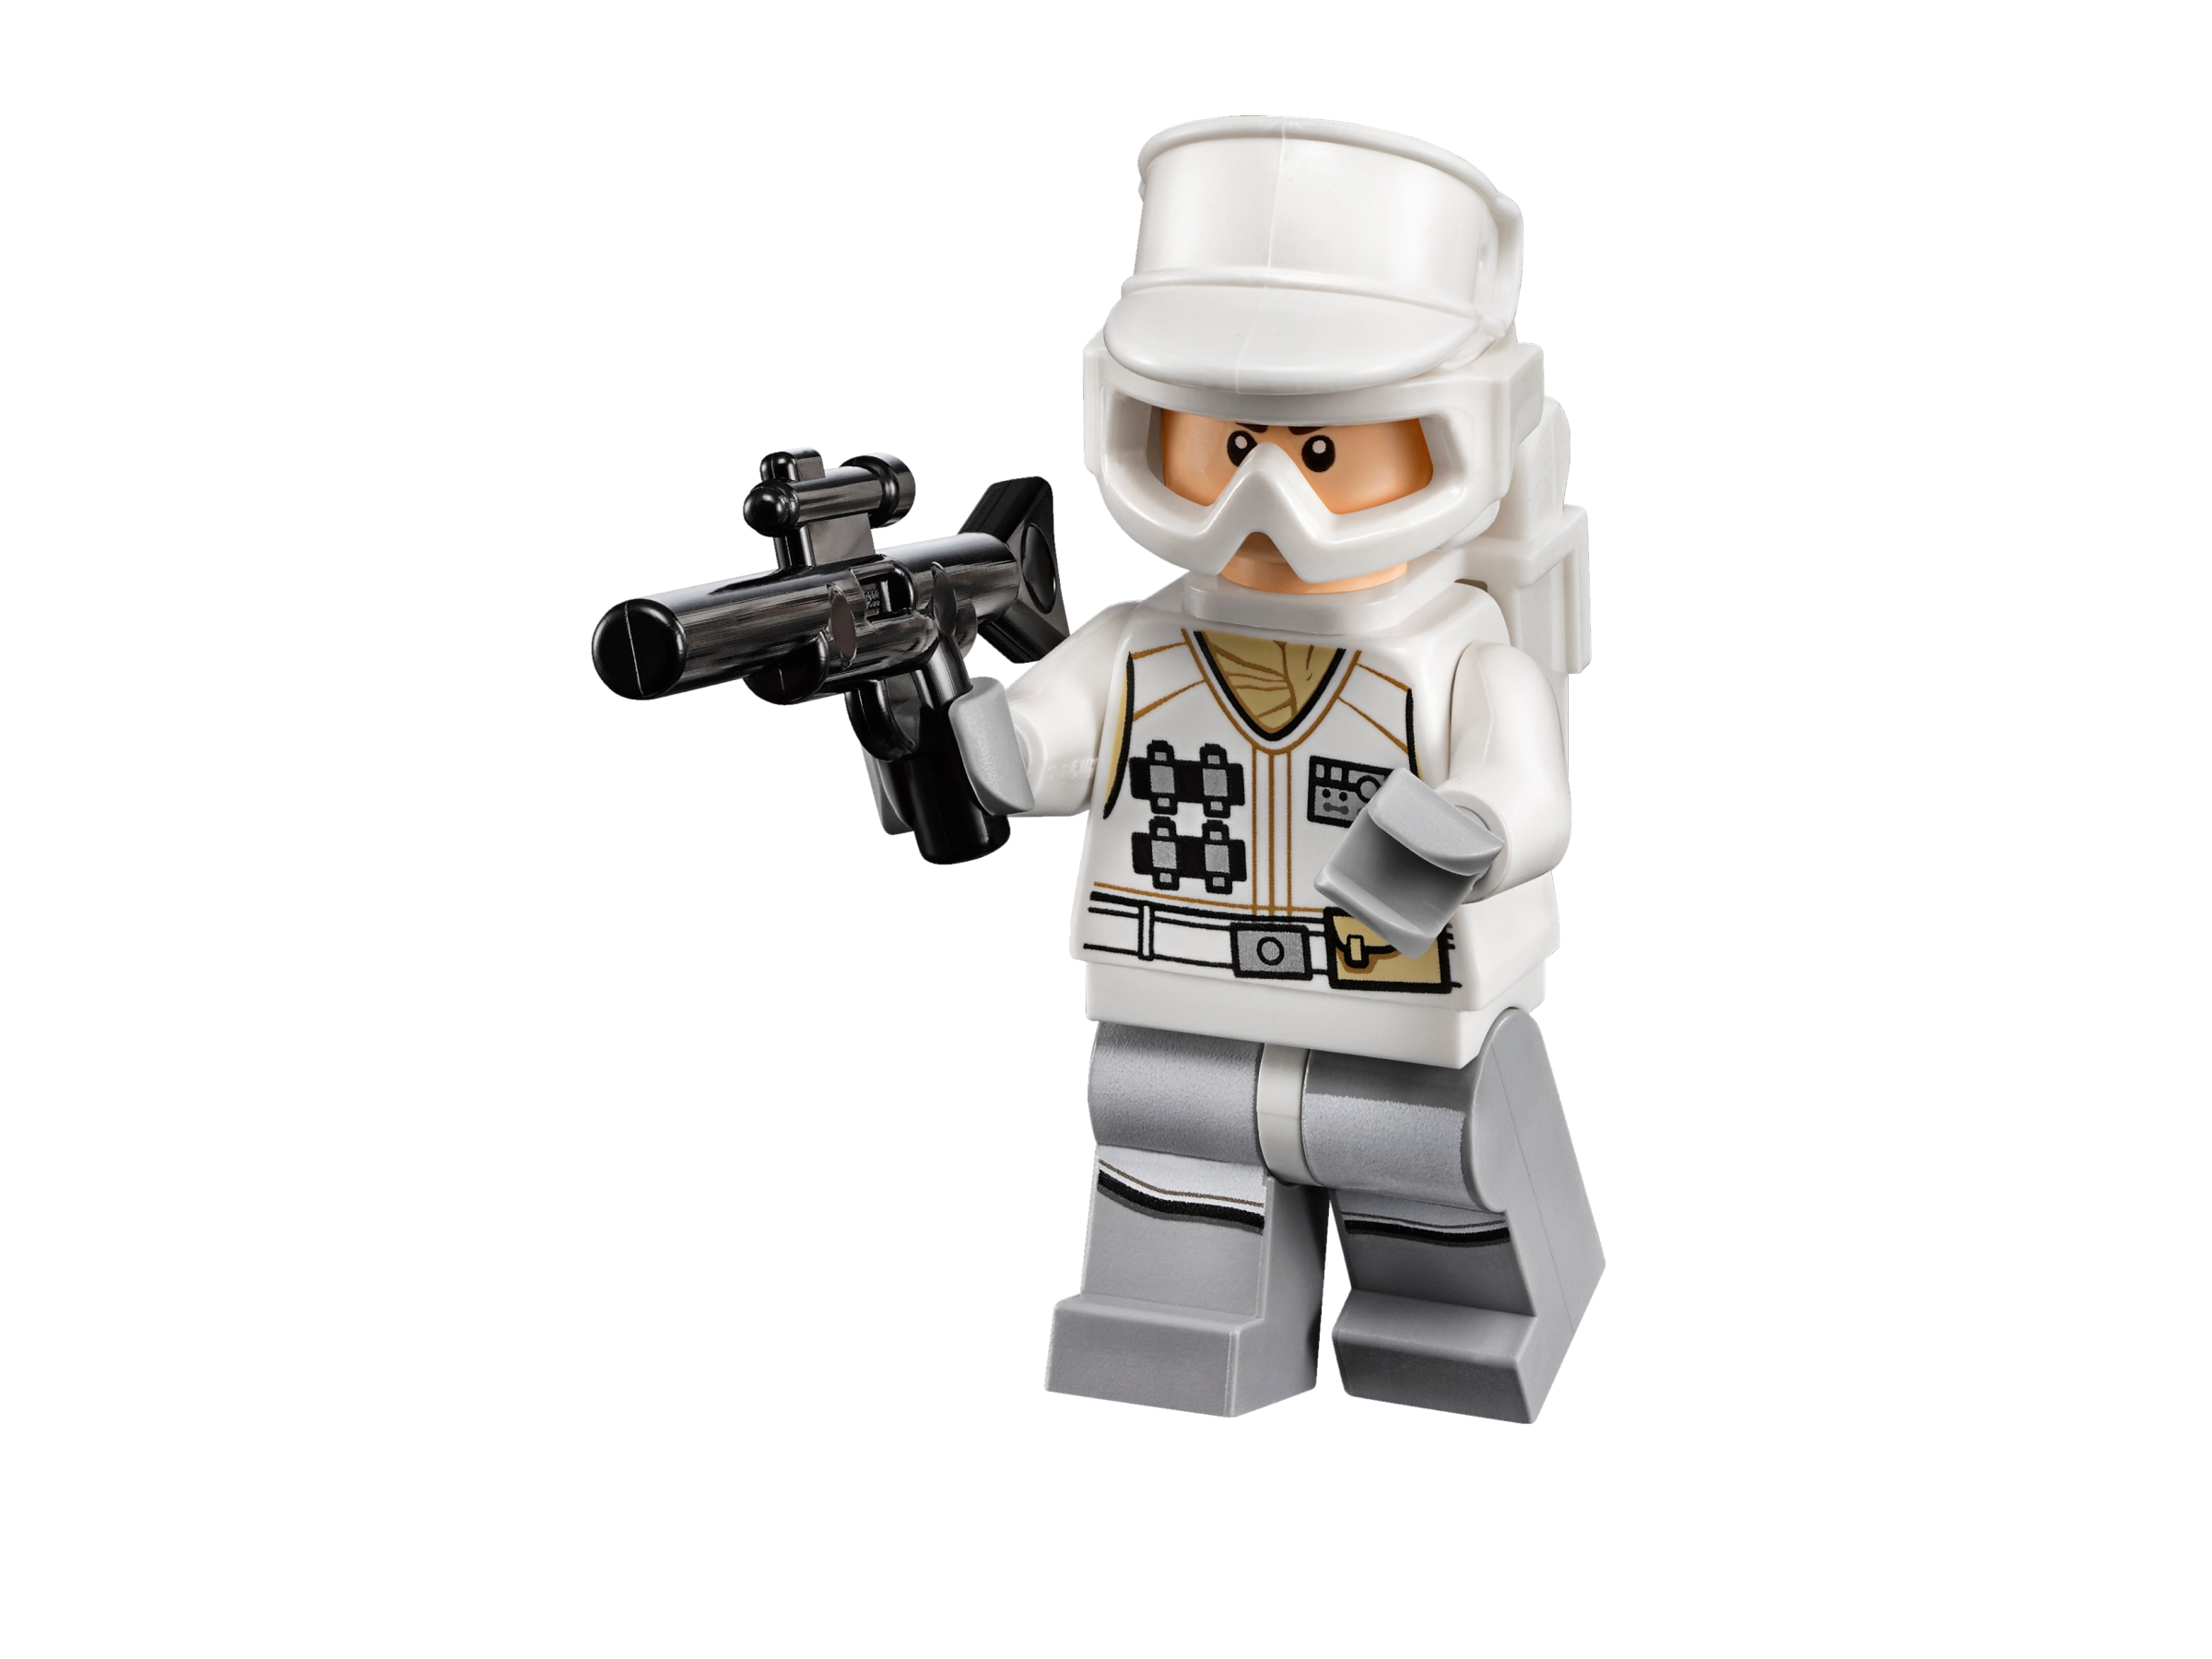 Lego Star Wars Minifigure 75138 Hoth Imperial Snow Trooper 